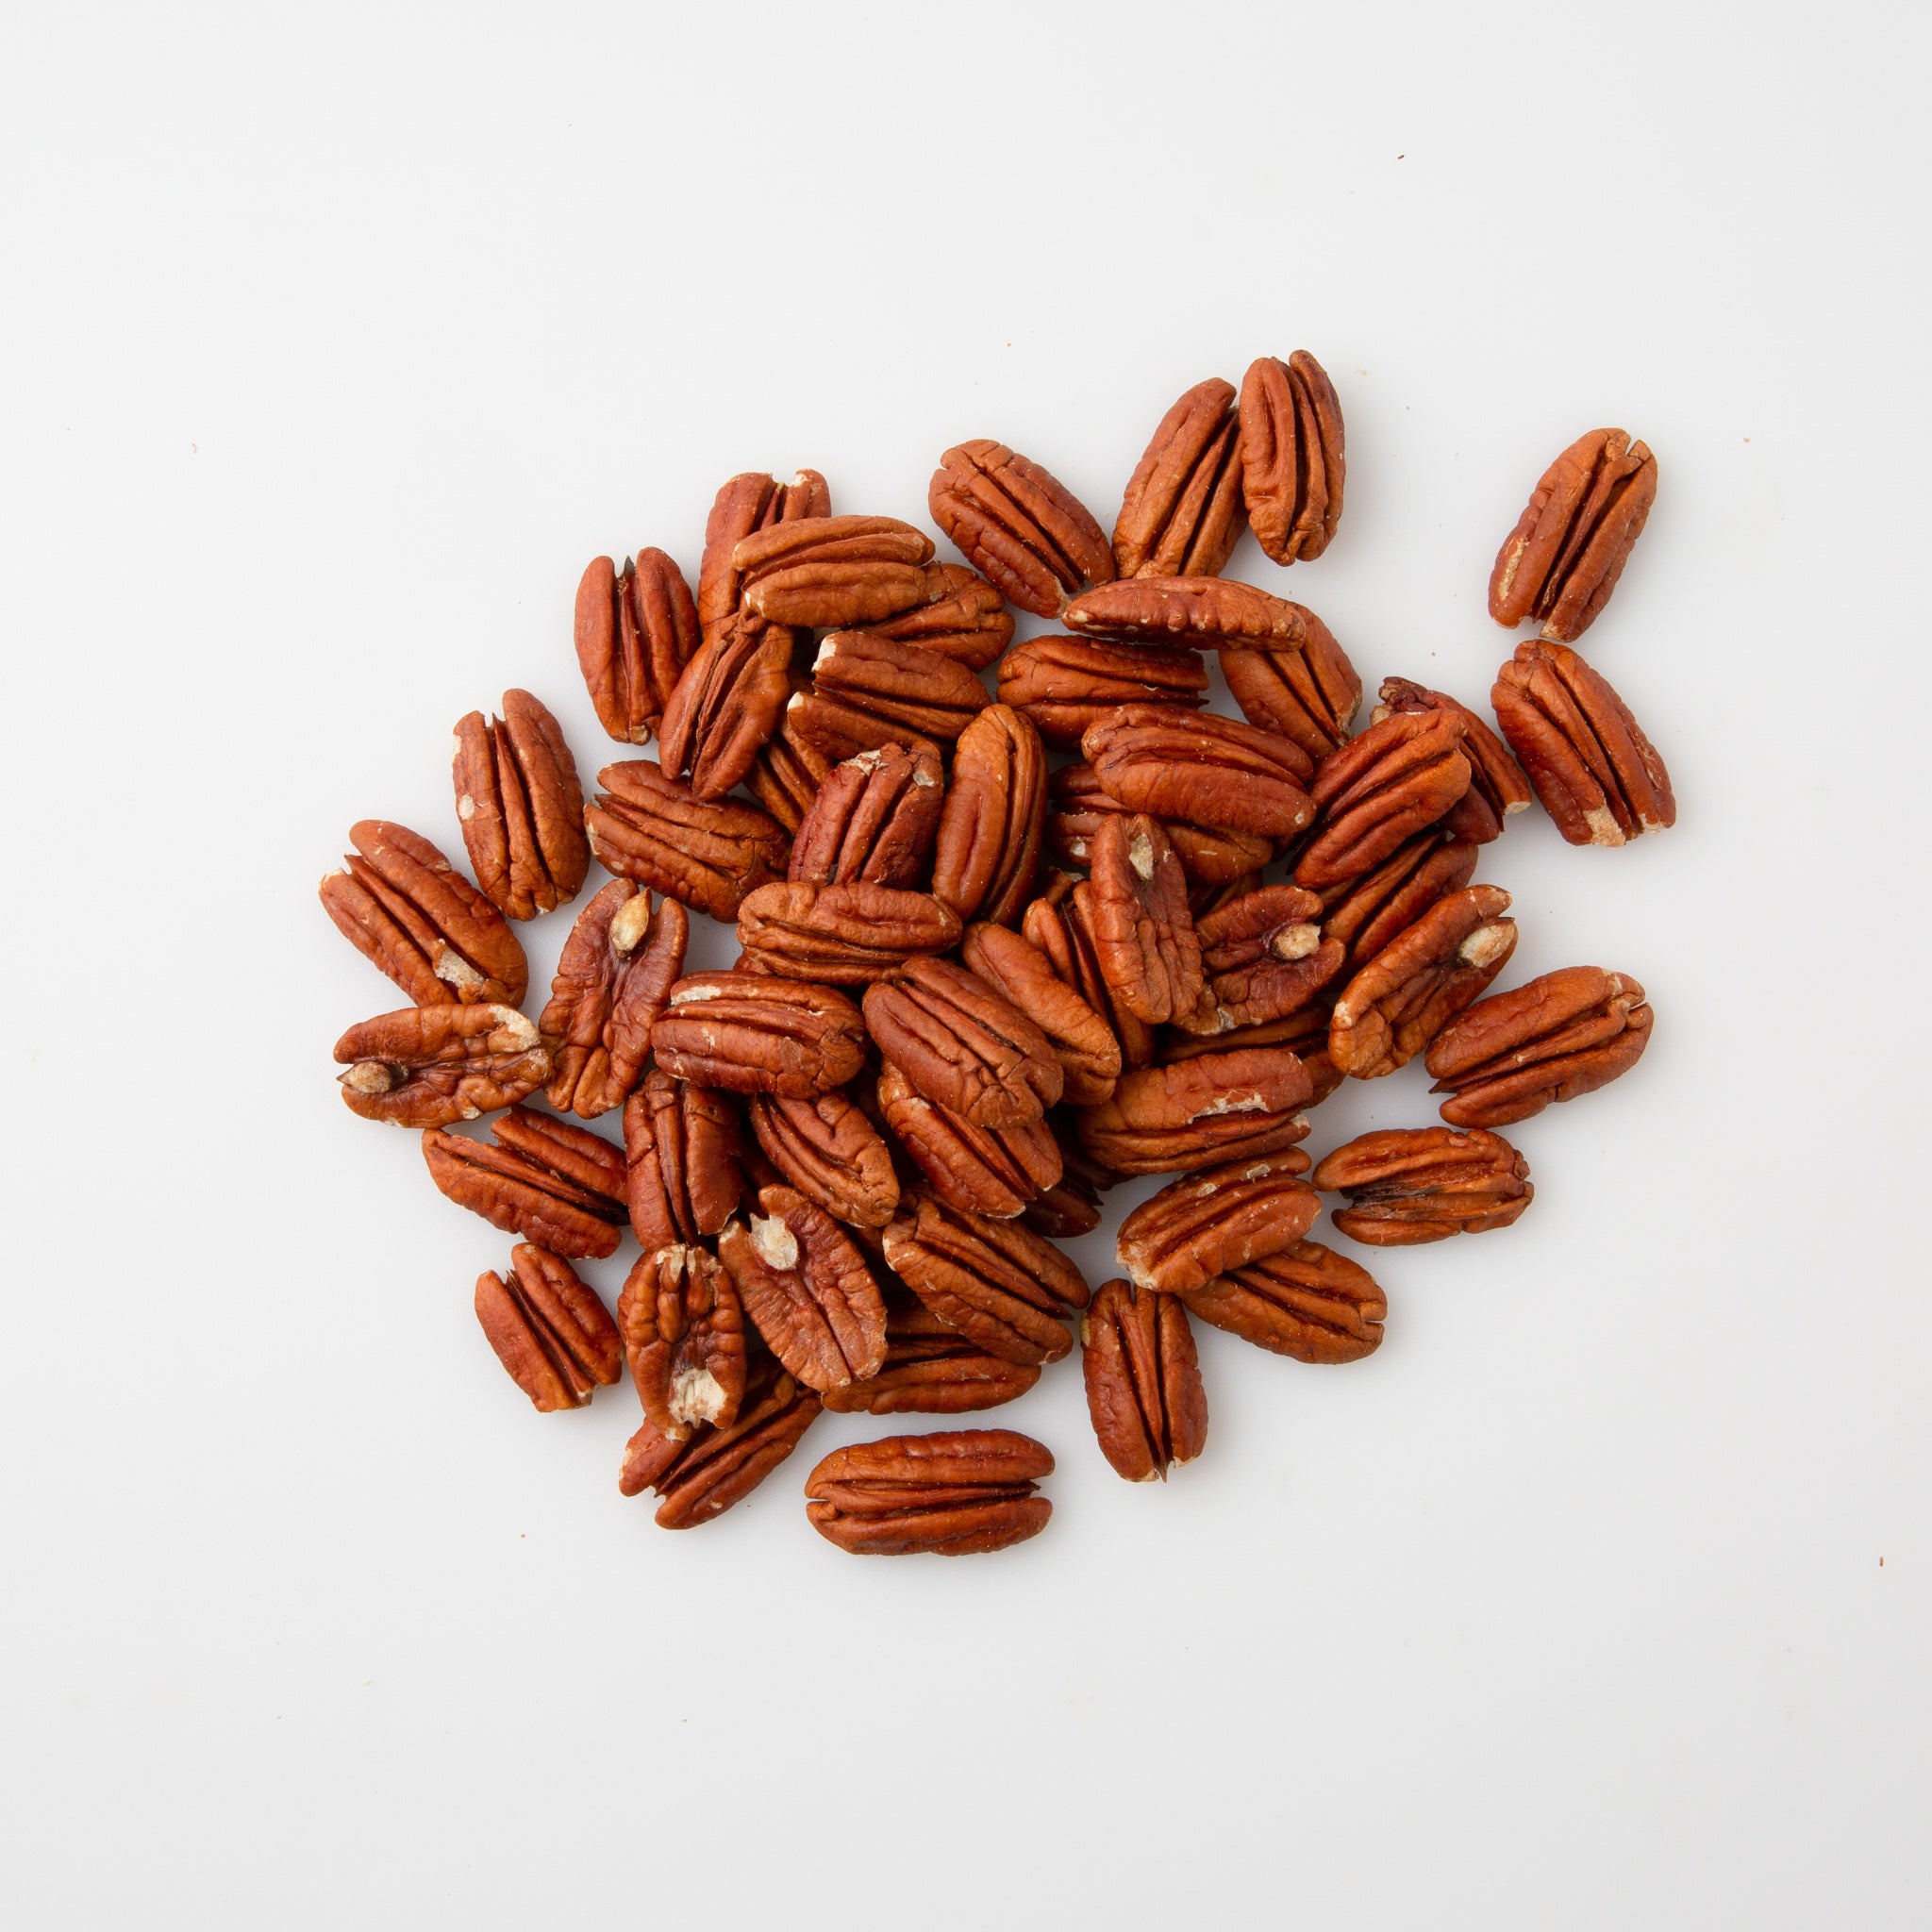 Raw Pecan Nuts (Raw Nuts) Image 2 - Naked Foods